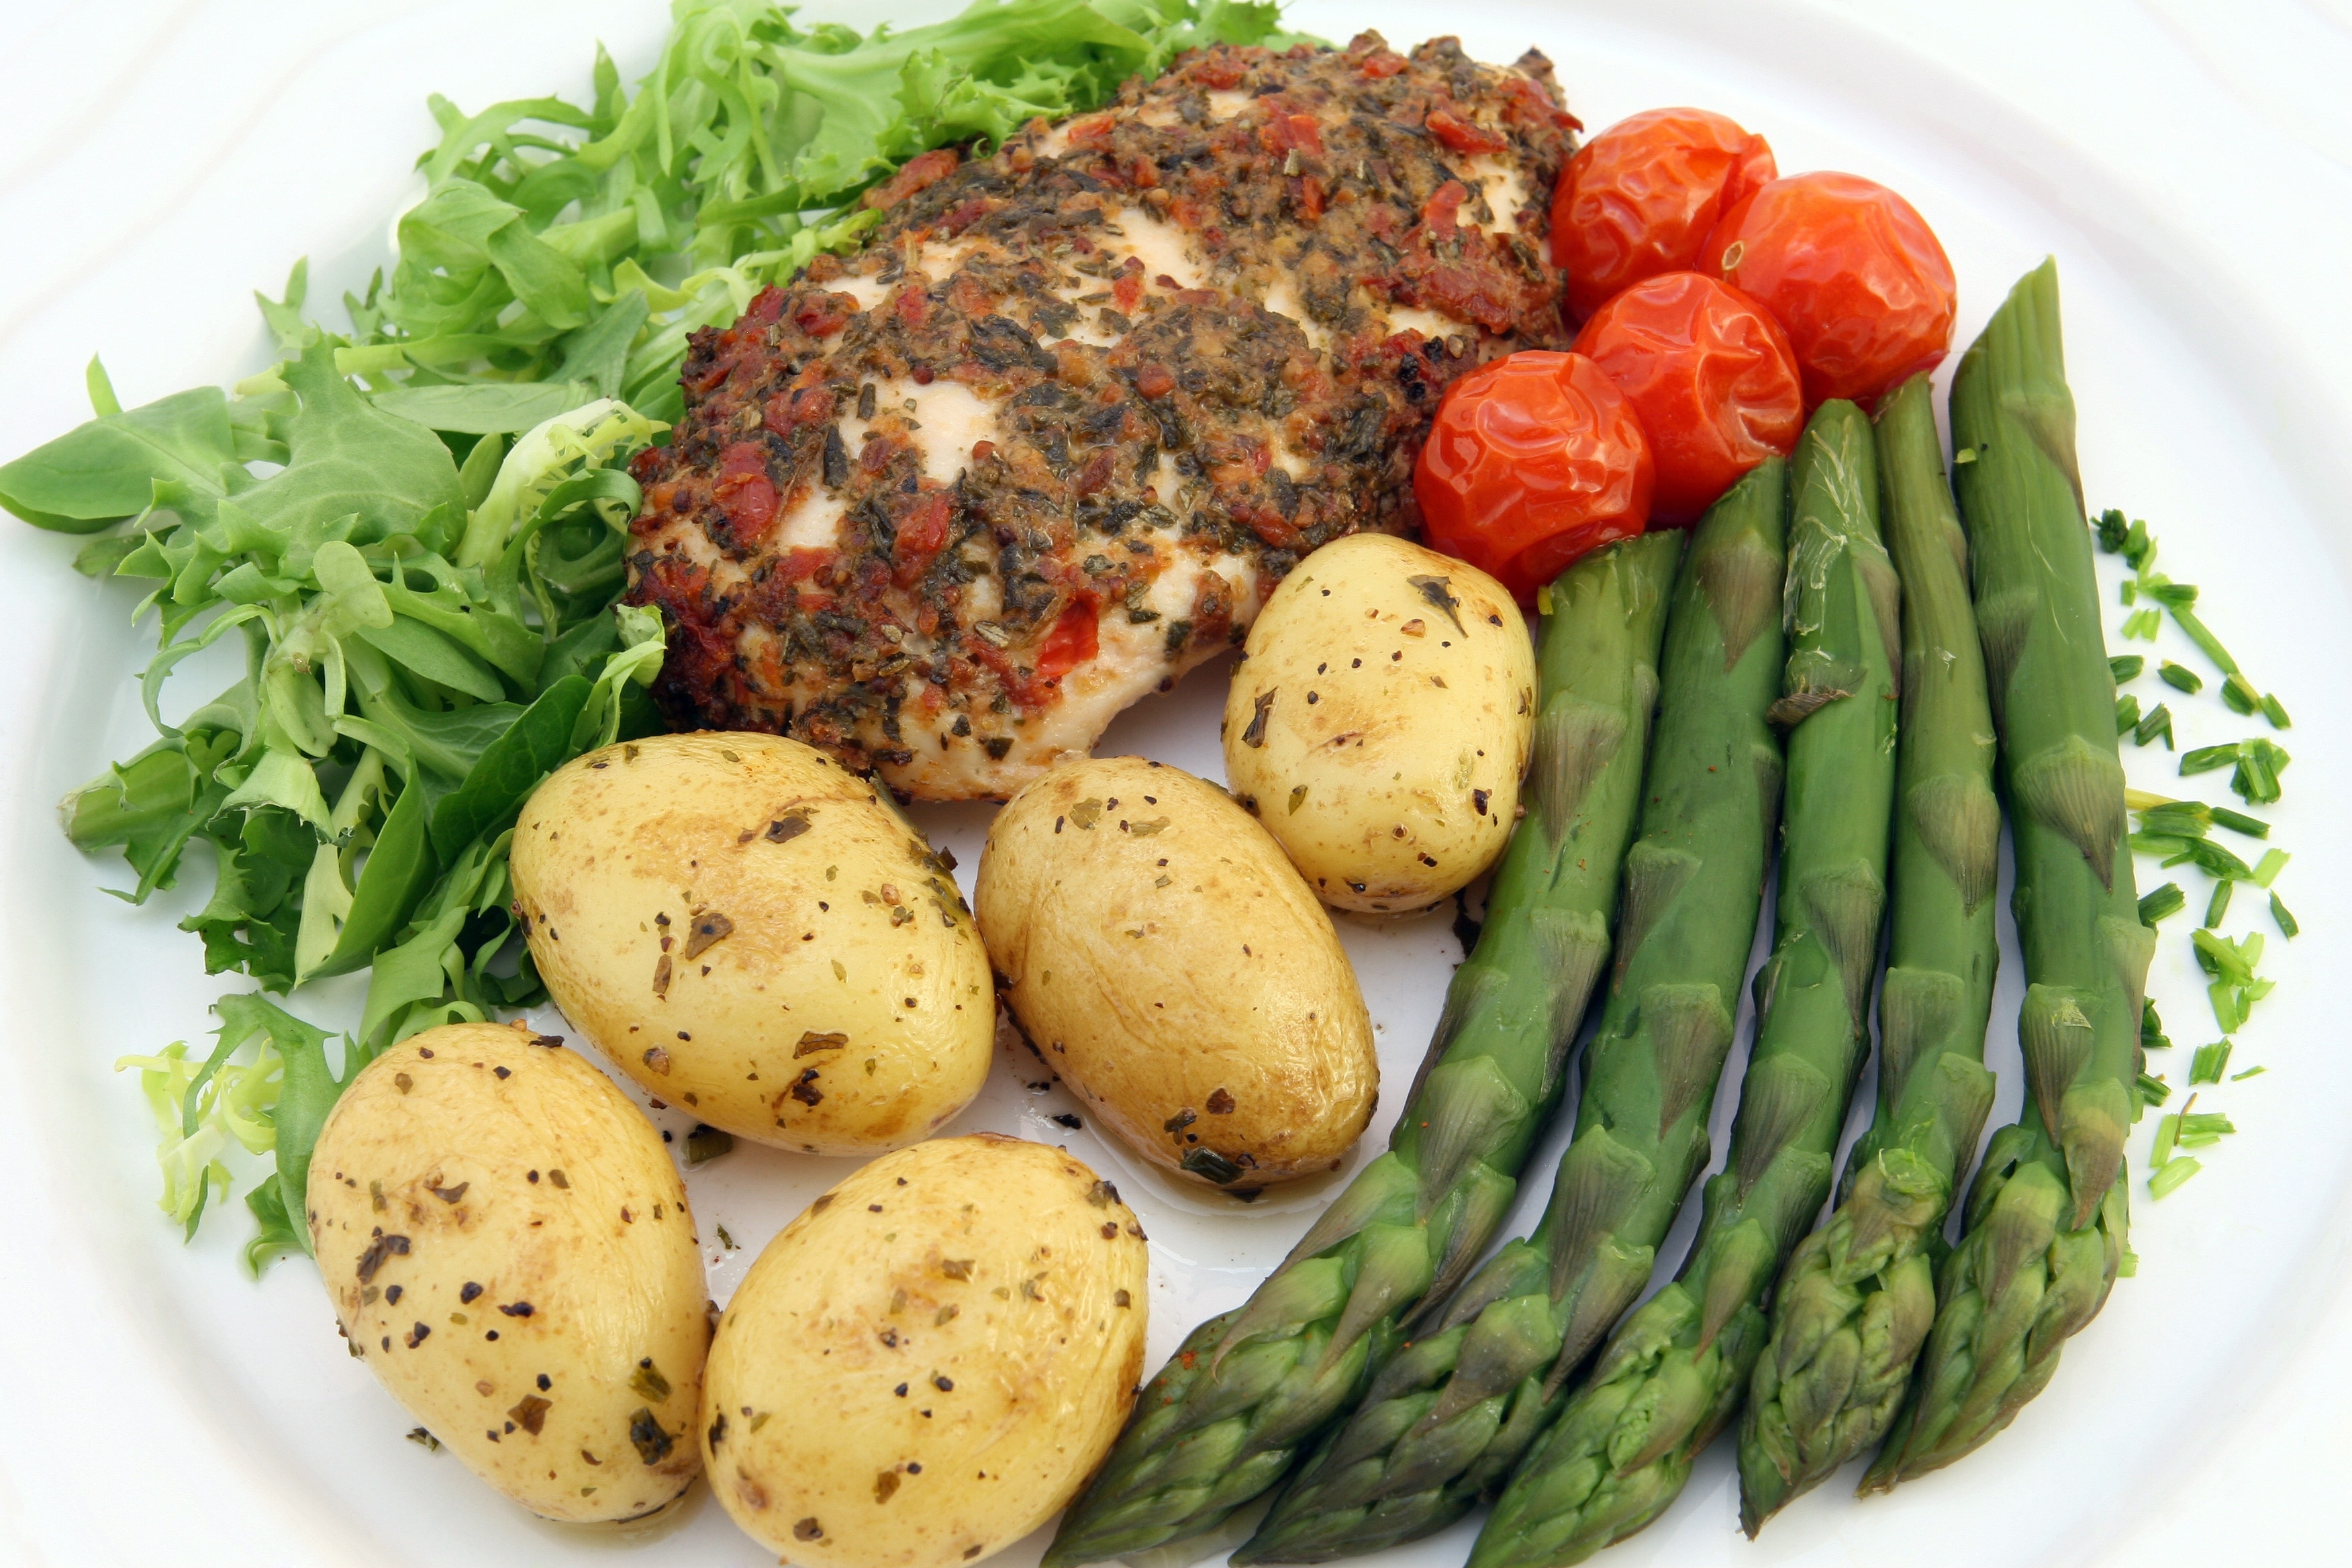 Asparagus, Catering, Appetite, Calories, food and drink, vegetable